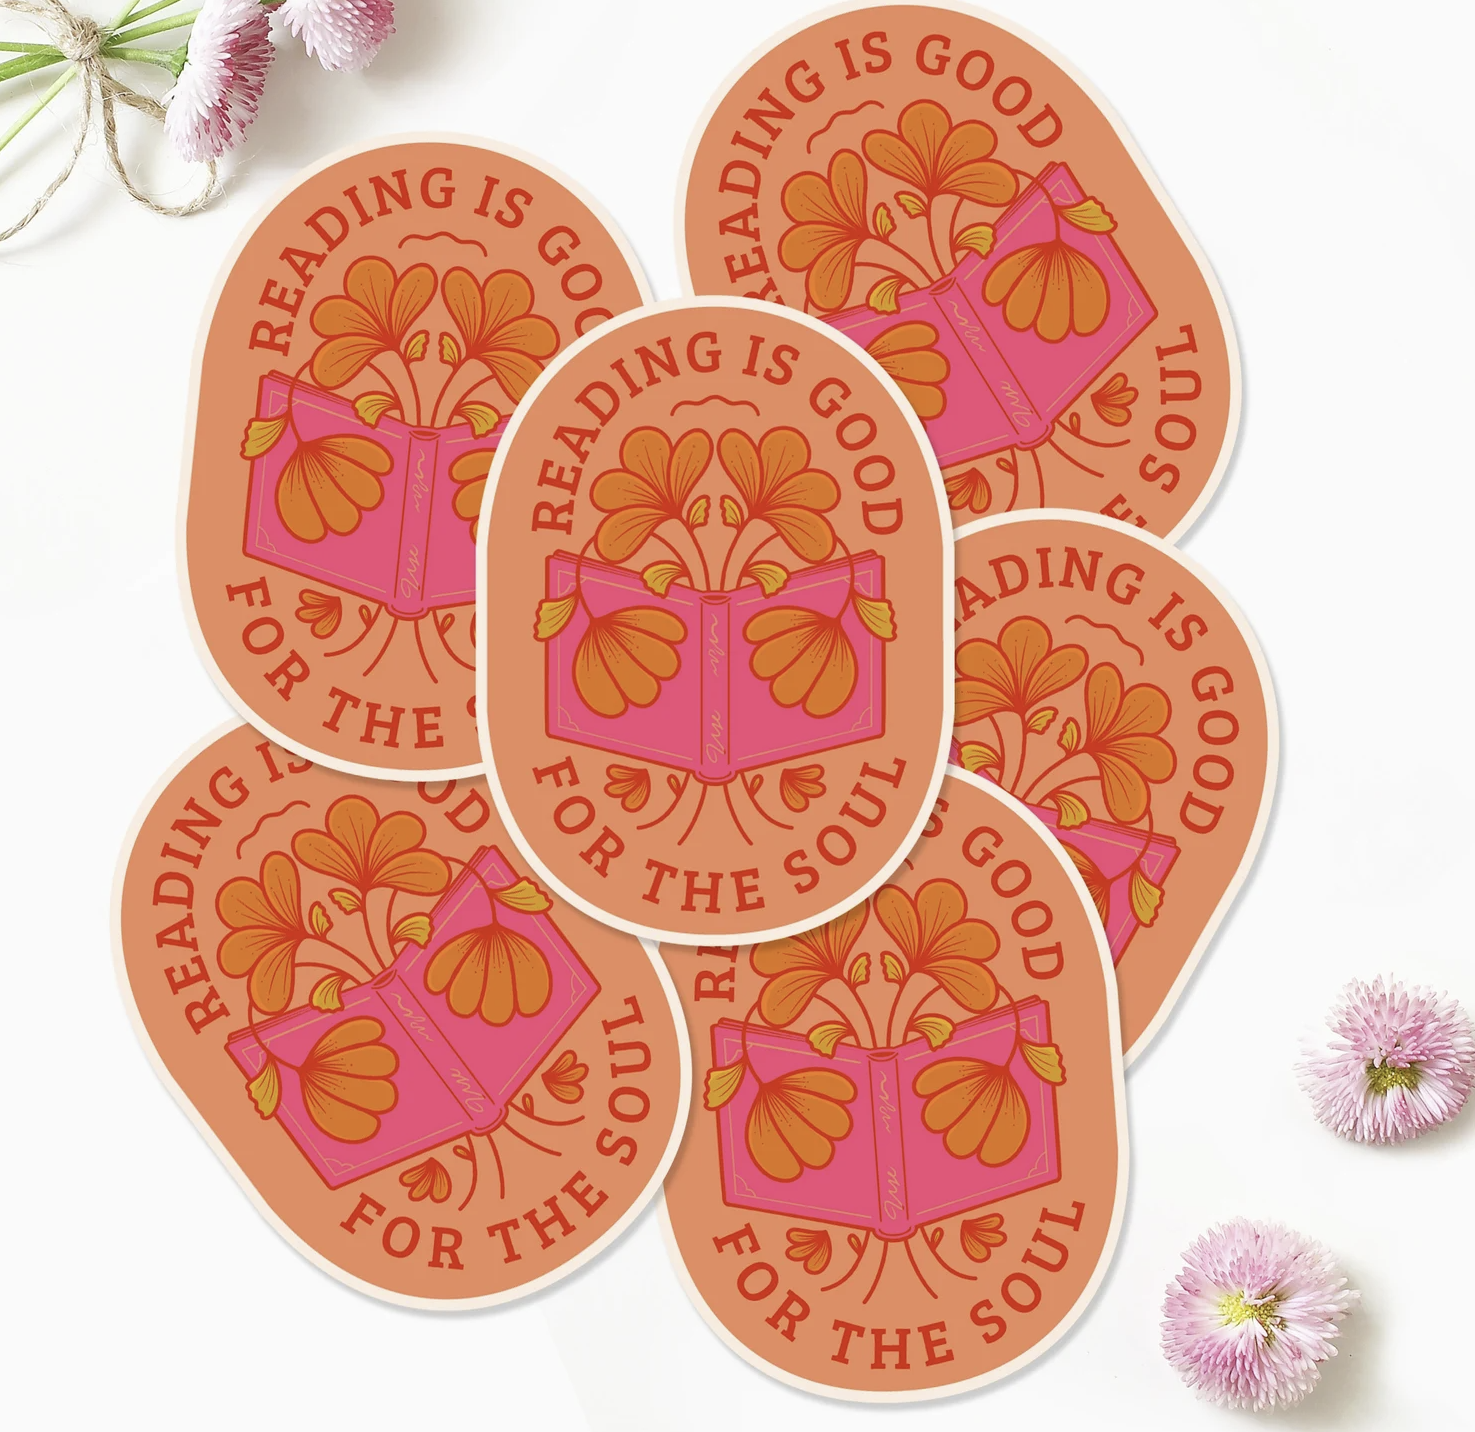 Peach oval sticker decorated with a pink book and surrounded by orange flowers with the words "Reading is good for the soul" around the edges.